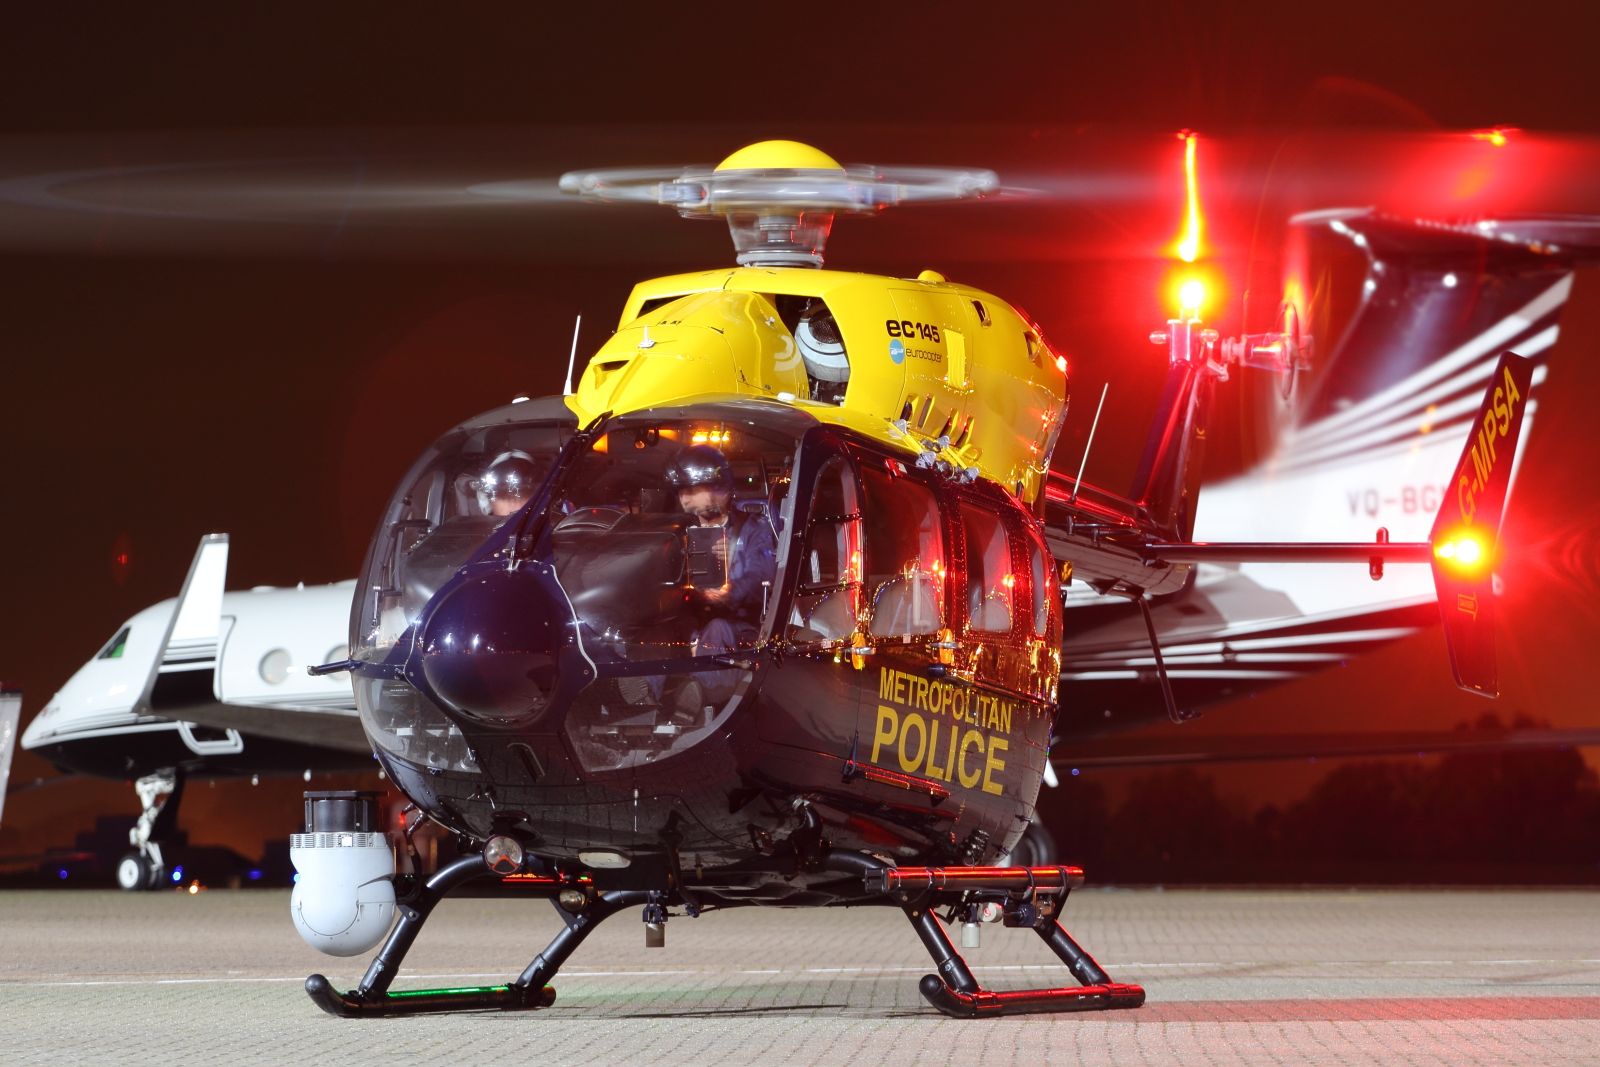 — — - The Metropolitan Police Helicopter is based at Northolt Airport, and normally patrols a large area including London Heathrow.